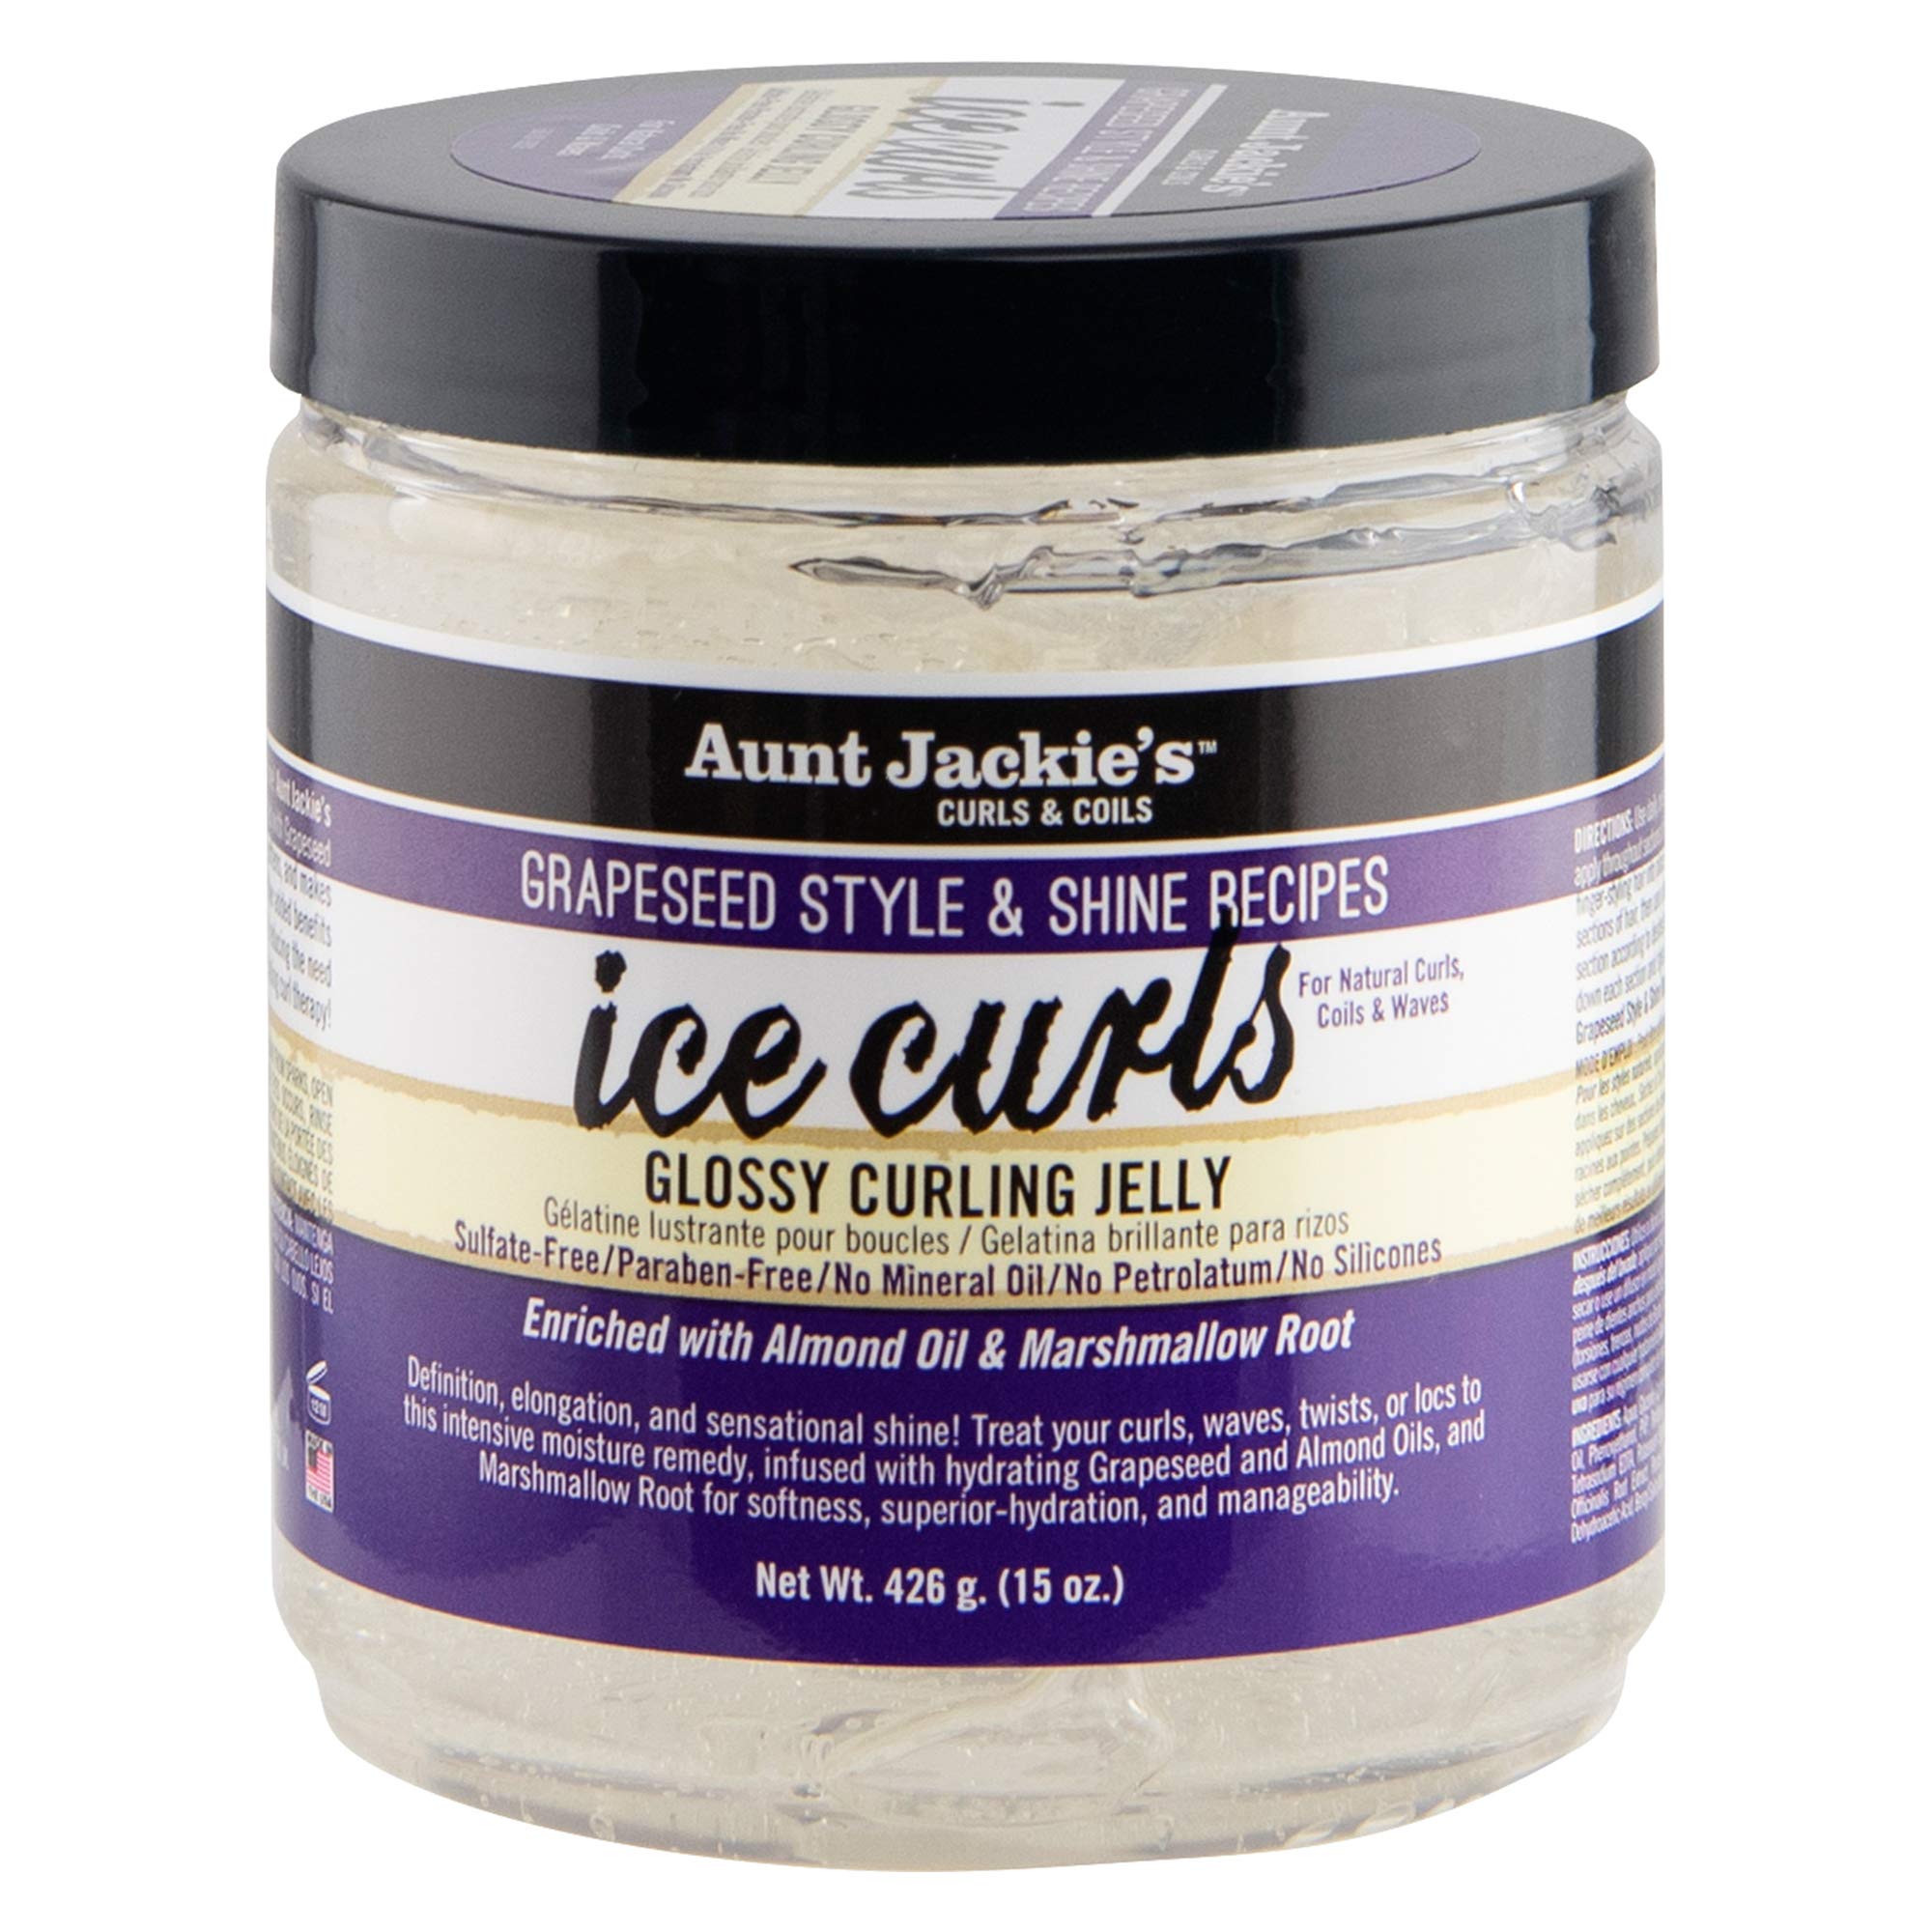 Aunt Jackie's Grapeseed Ice Curls Glossy Curling Jelly 15oz